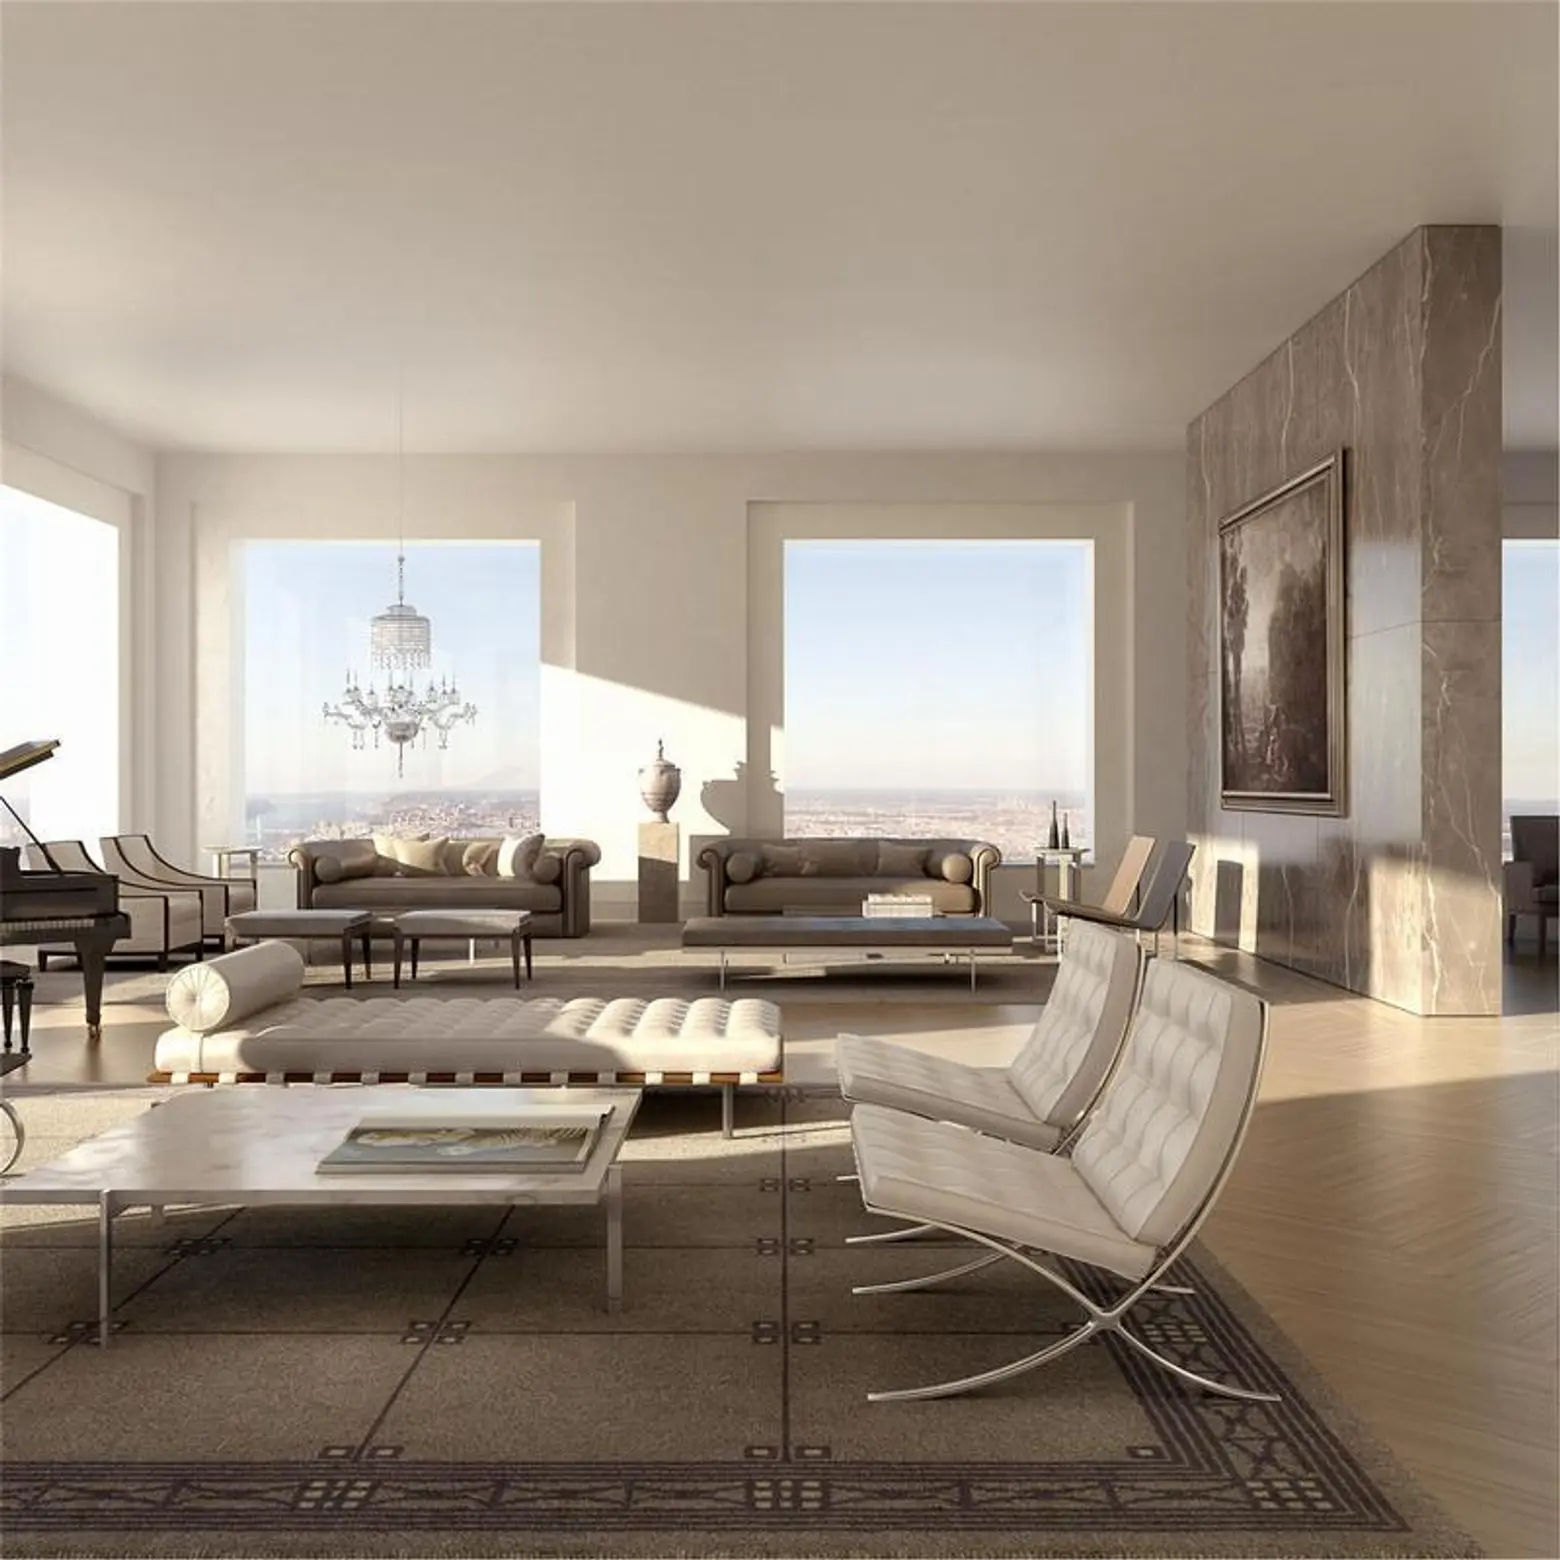 432 Park penthouse, 432 Park Avenue, most expensive condos in NYC